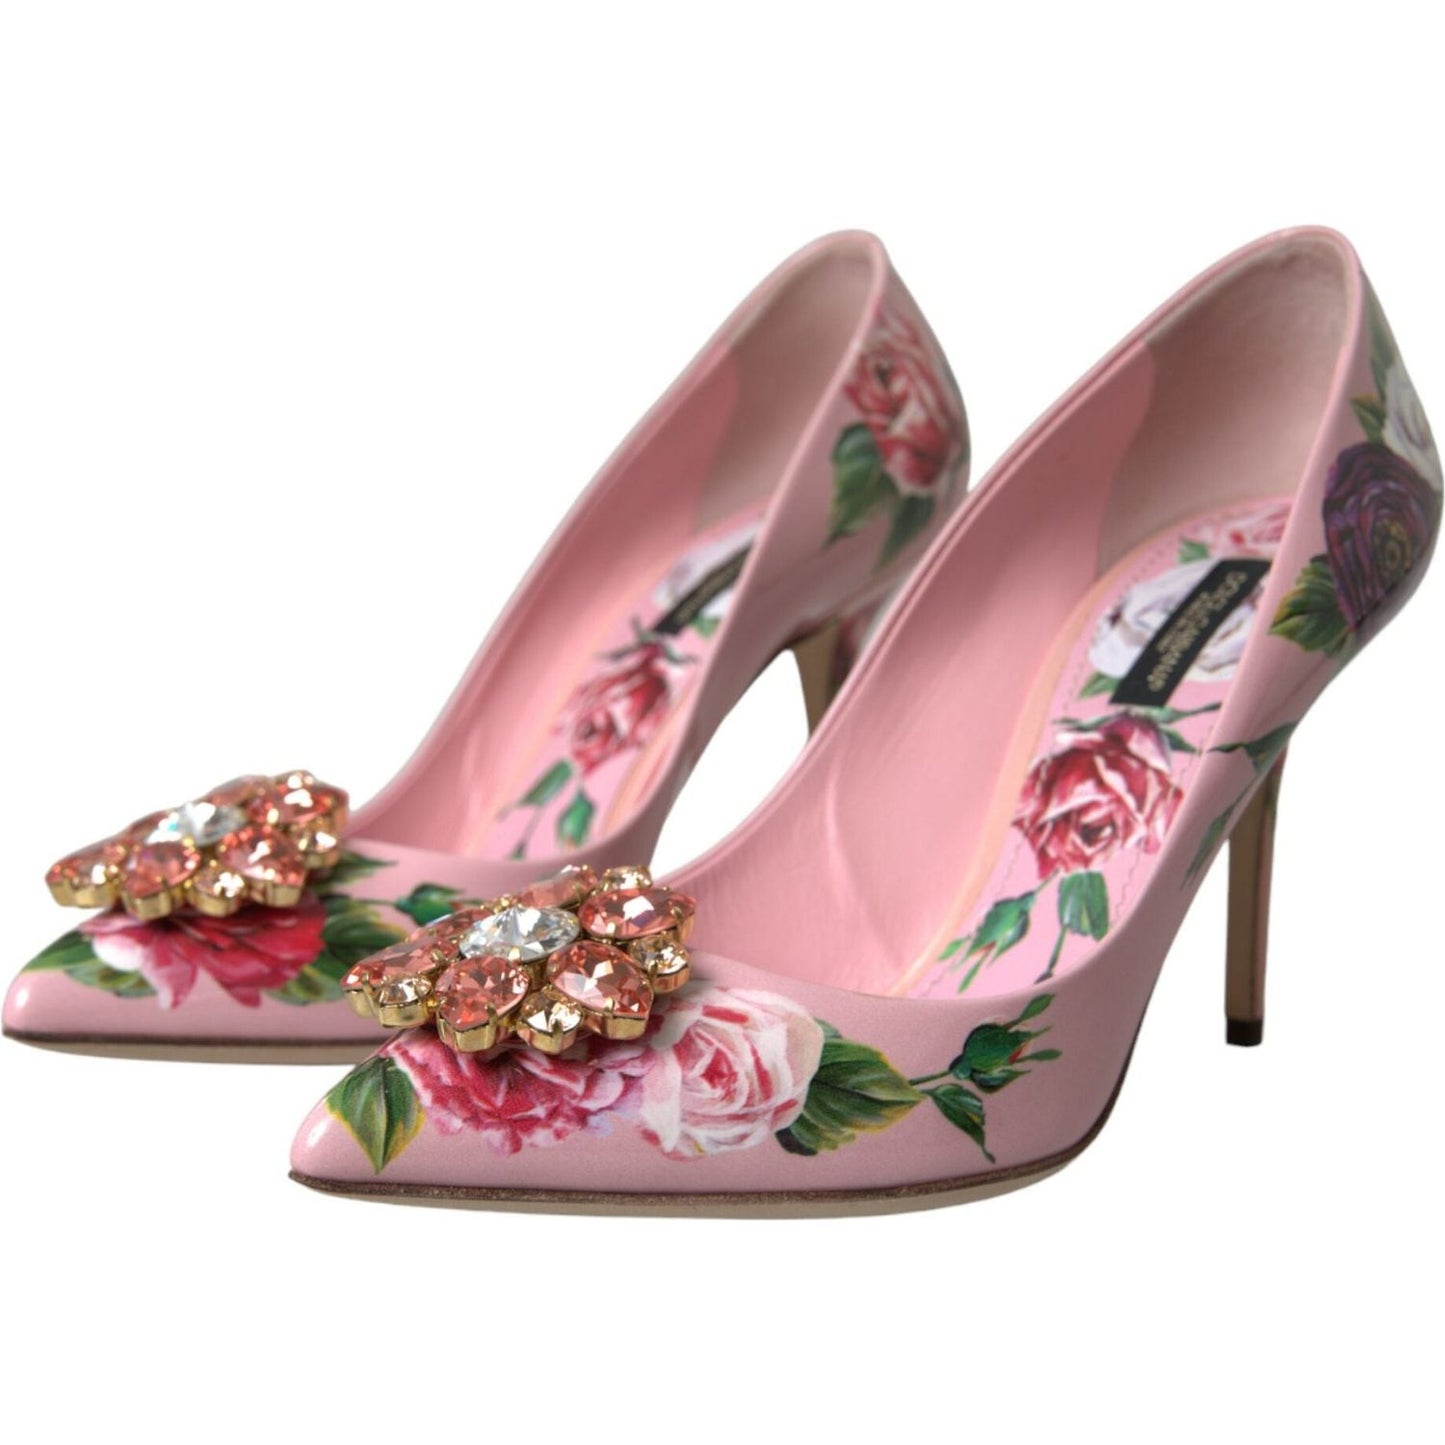 Dolce & Gabbana Pink Floral Leather Crystal Heels Pumps Shoes pink-floral-leather-crystal-heels-pumps-shoes